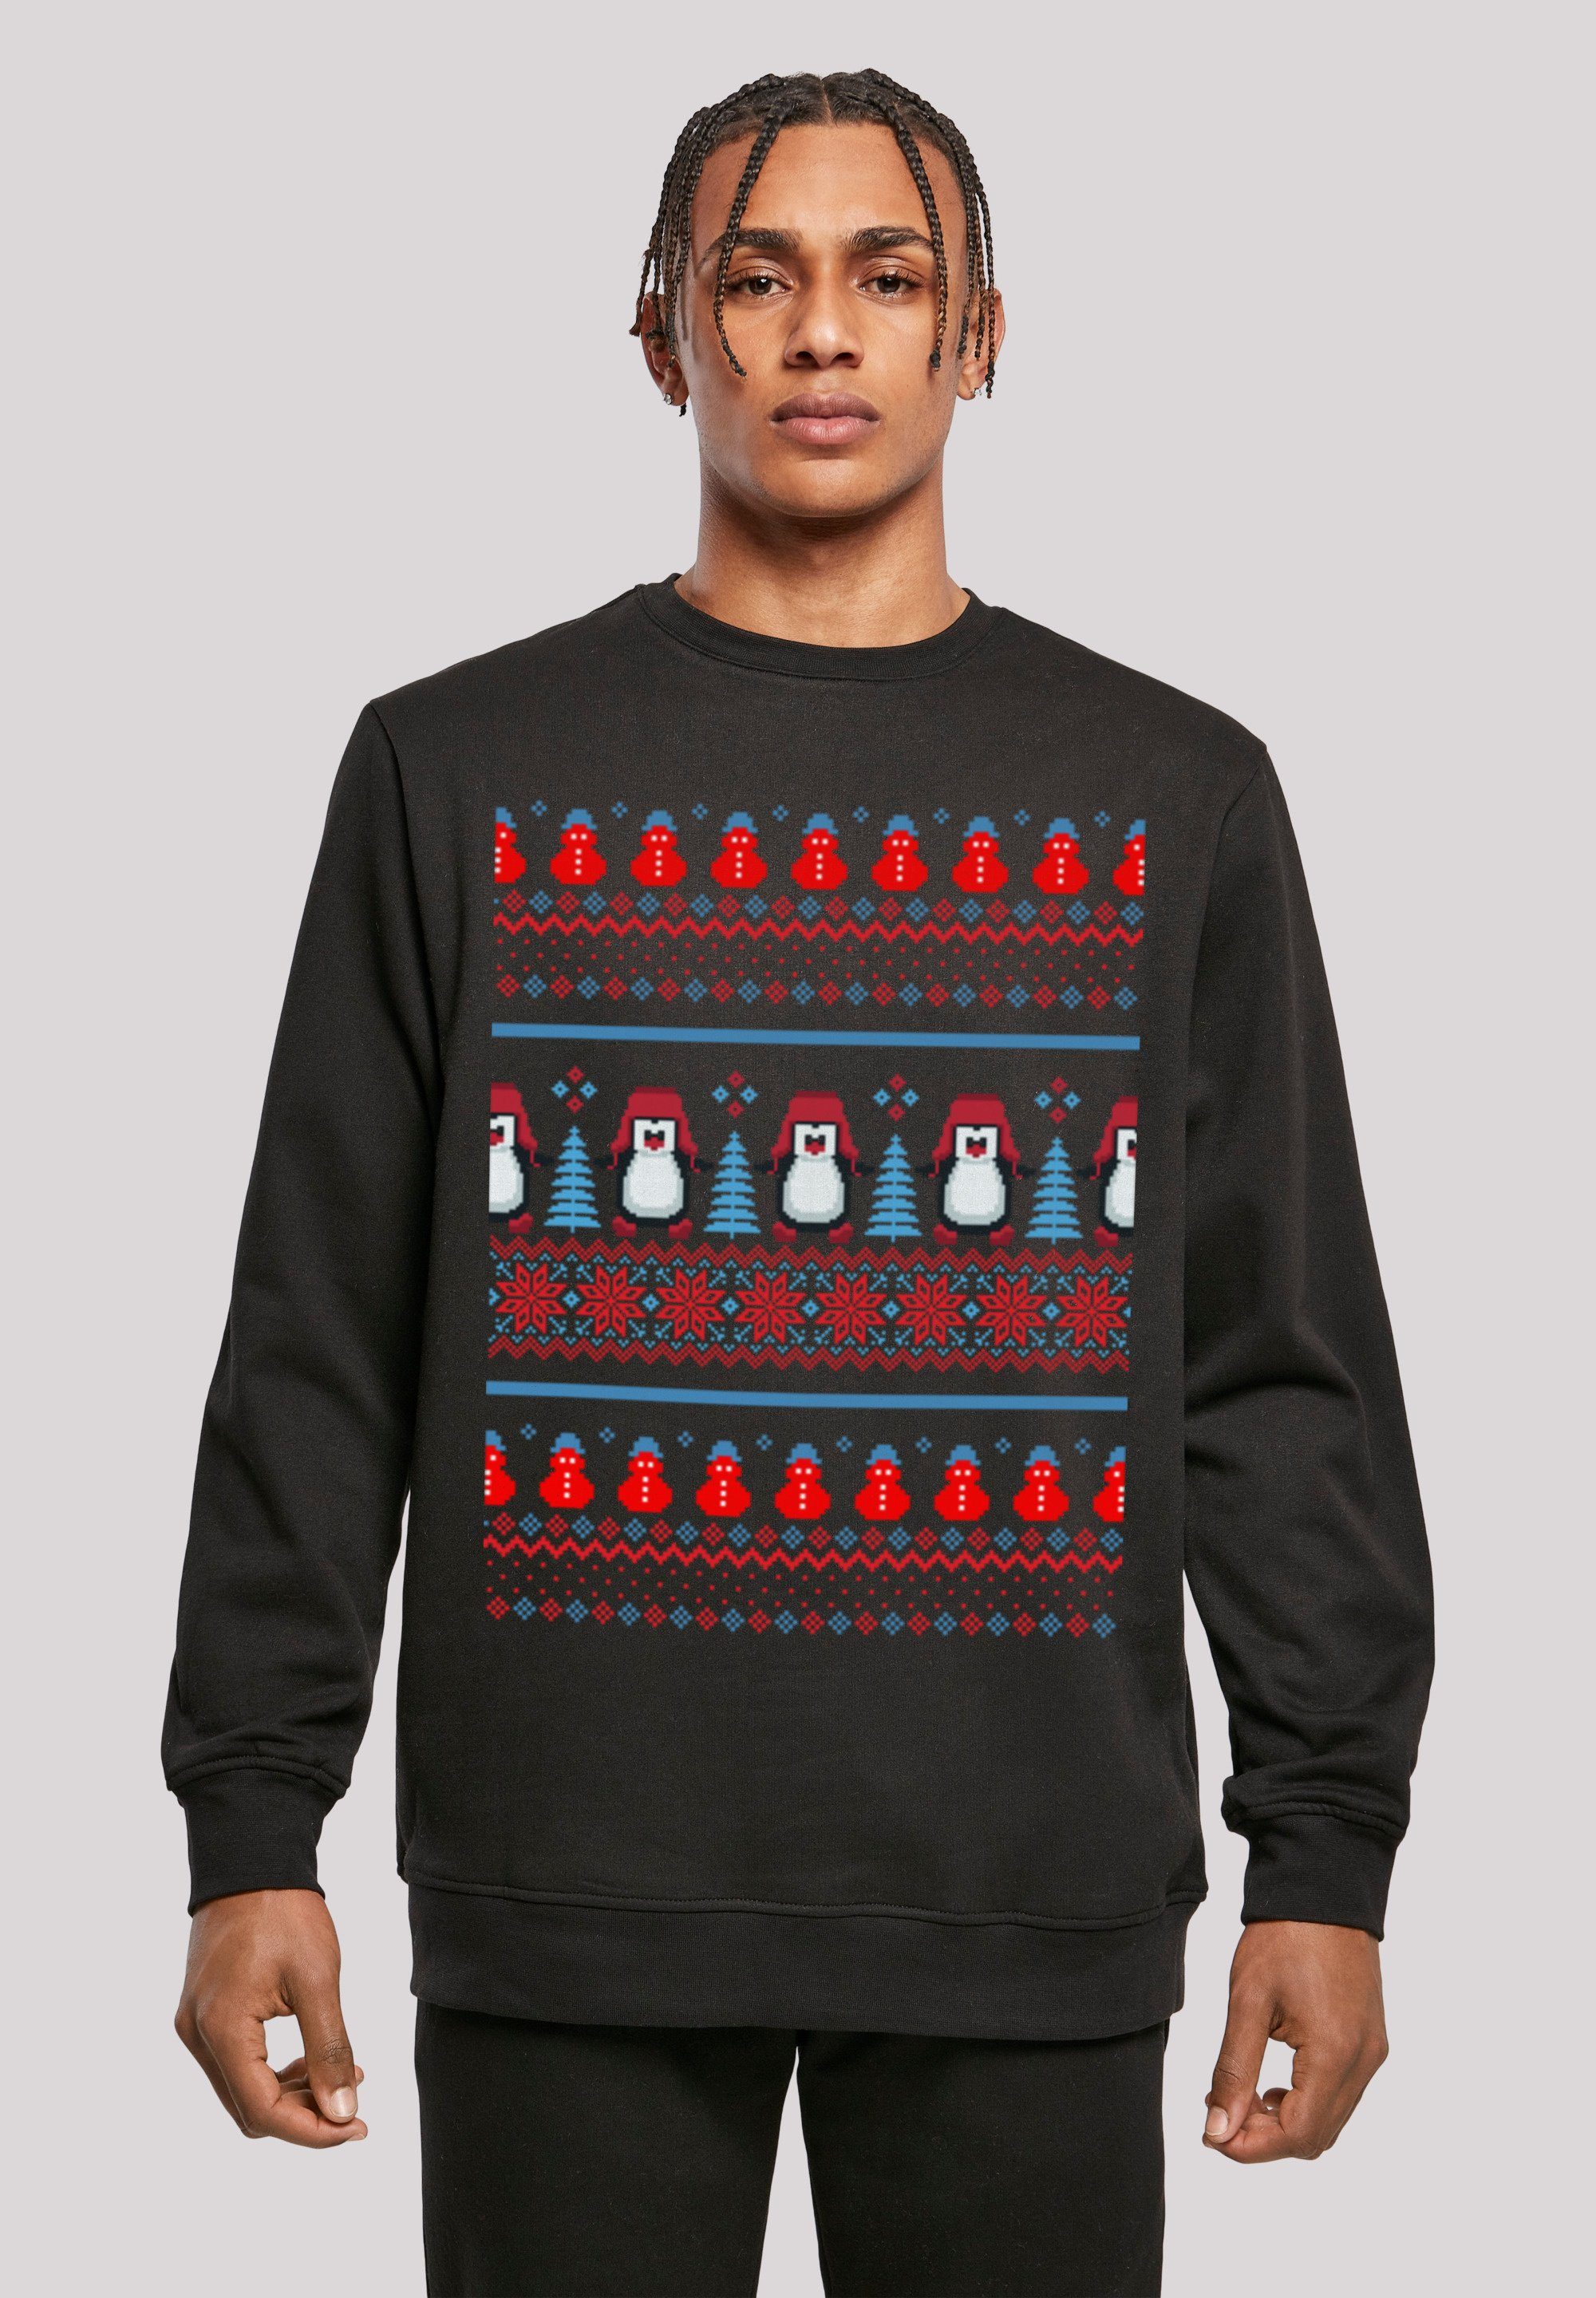 Basic Hoodie F4NT4STIC Muster Crewneck, Look, Regular entspannter Fit Pinguin Print, Christmas